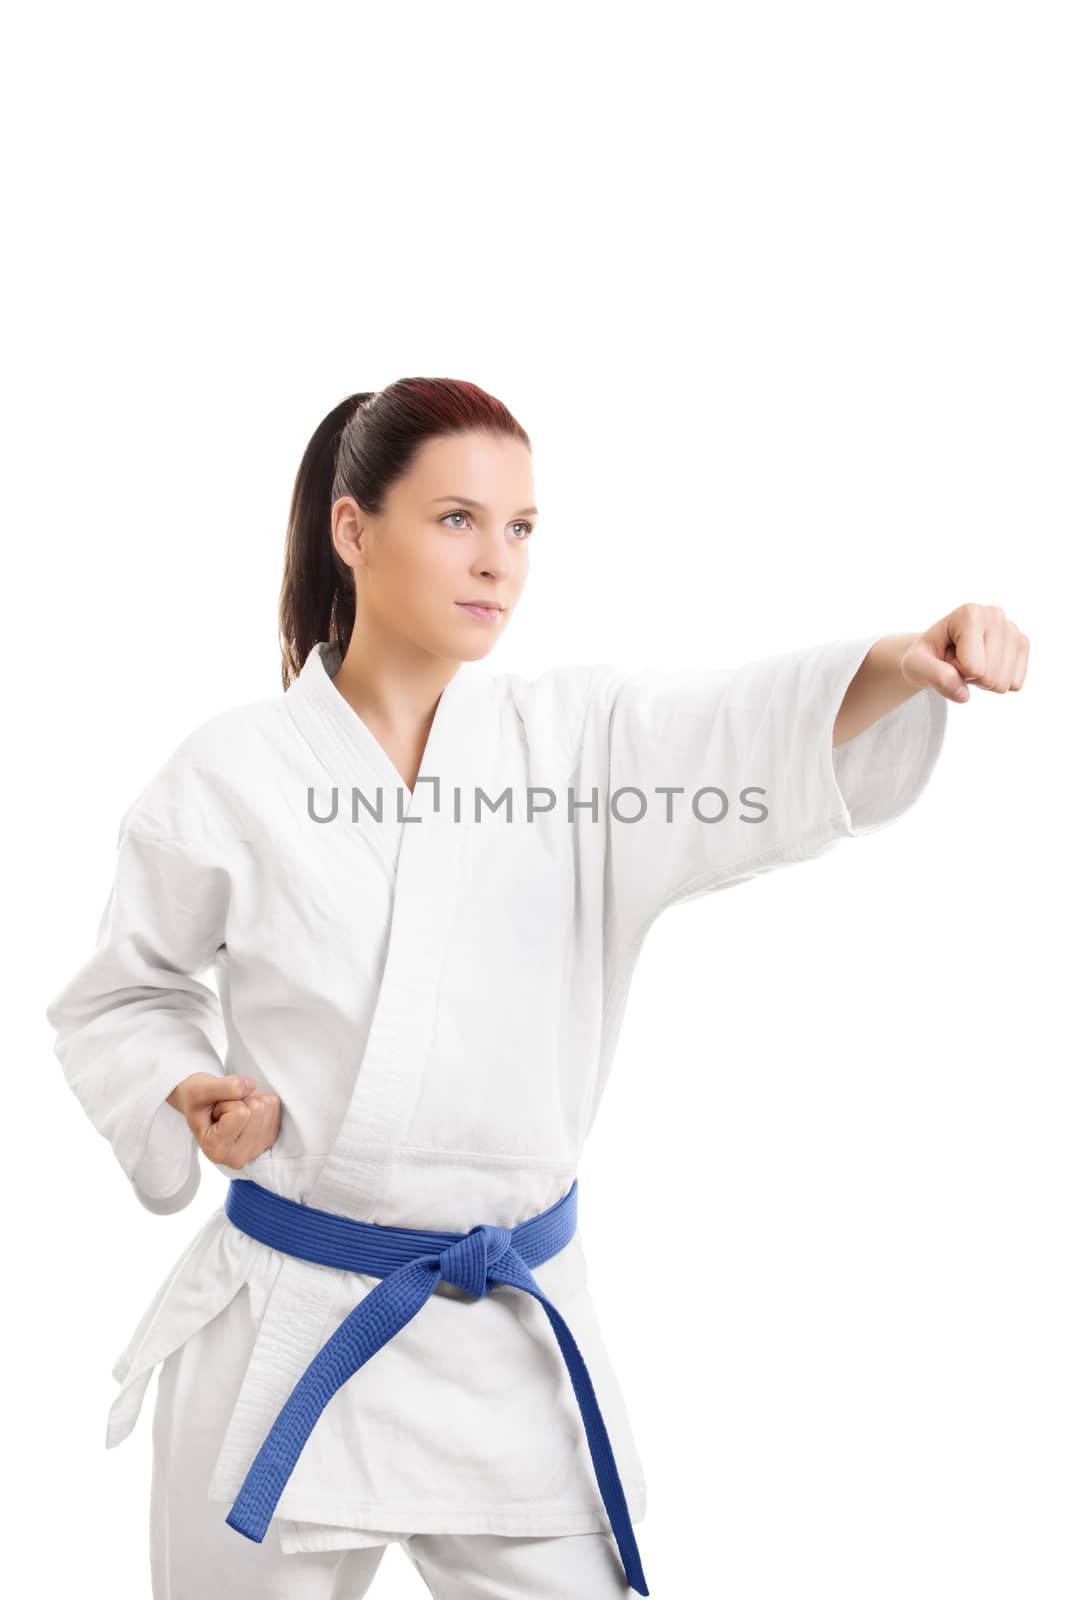 Martial arts concept. Portrait of a beautiful young girl in a kimono with blue belt punching, isolated on white background.